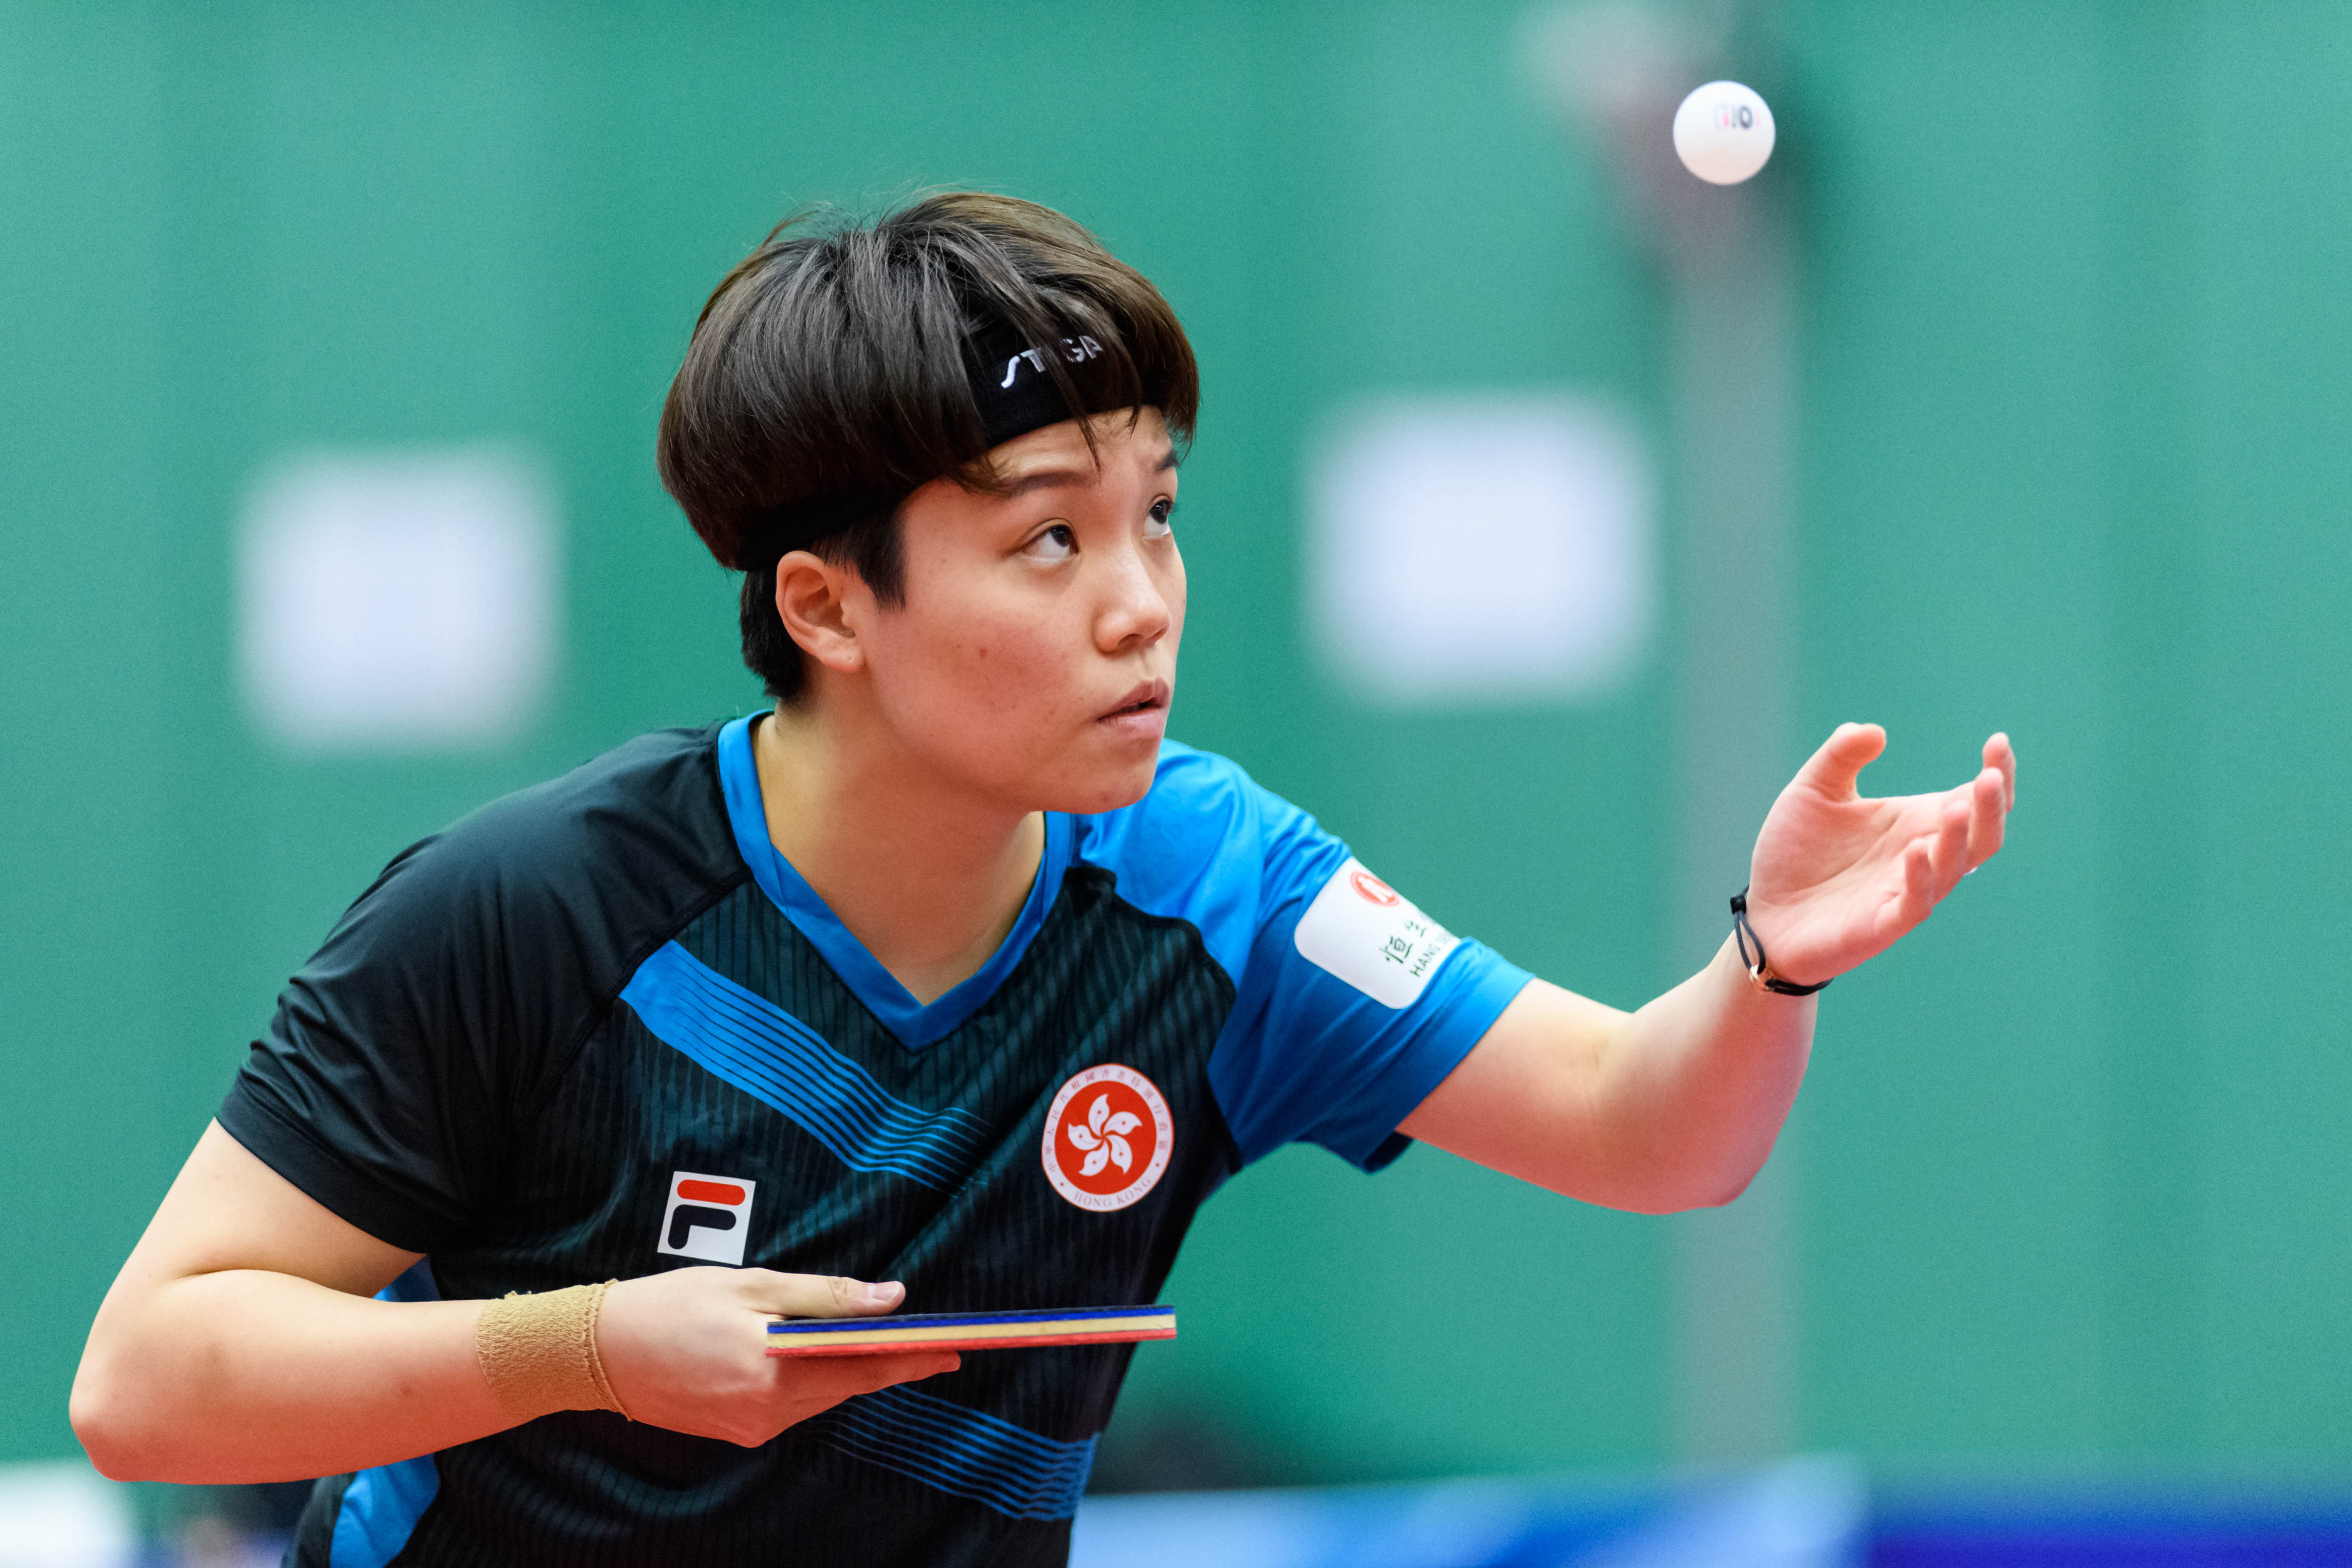 Doo Hoi-kem will lead the women’s squad in their quest for a medal at the Chengdu World Team Championships. Photo: Hong Kong Table Tennis Association